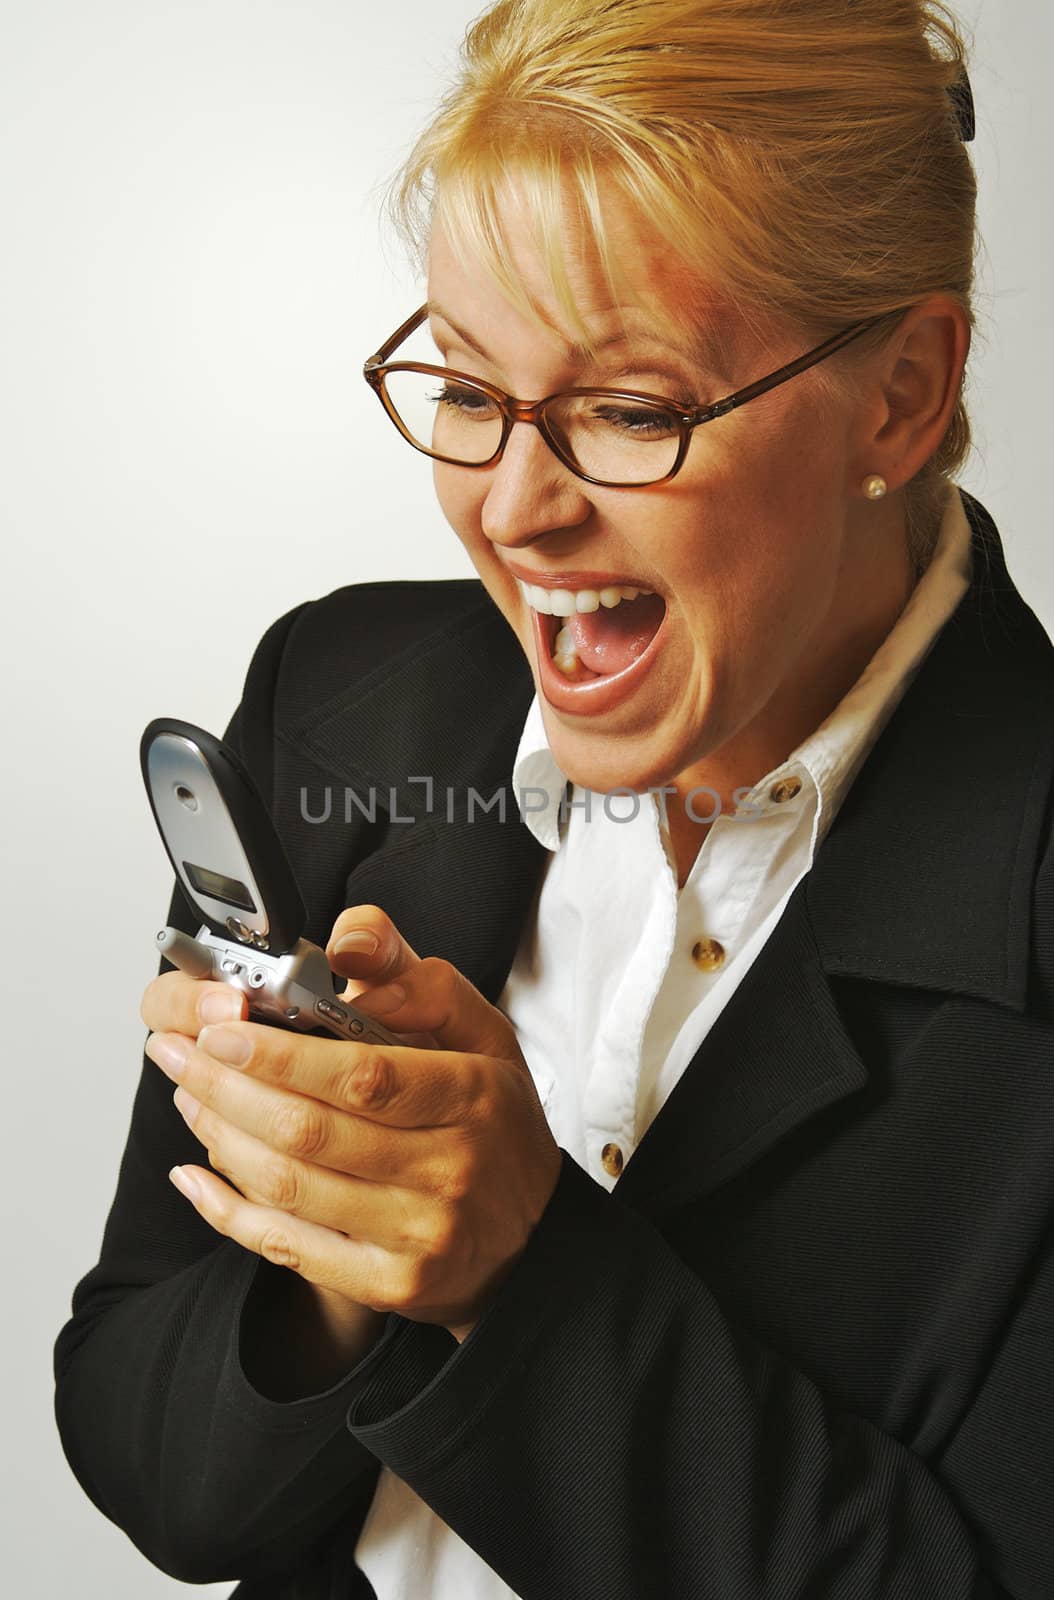 Elated Businesswoman Using Cell Phone